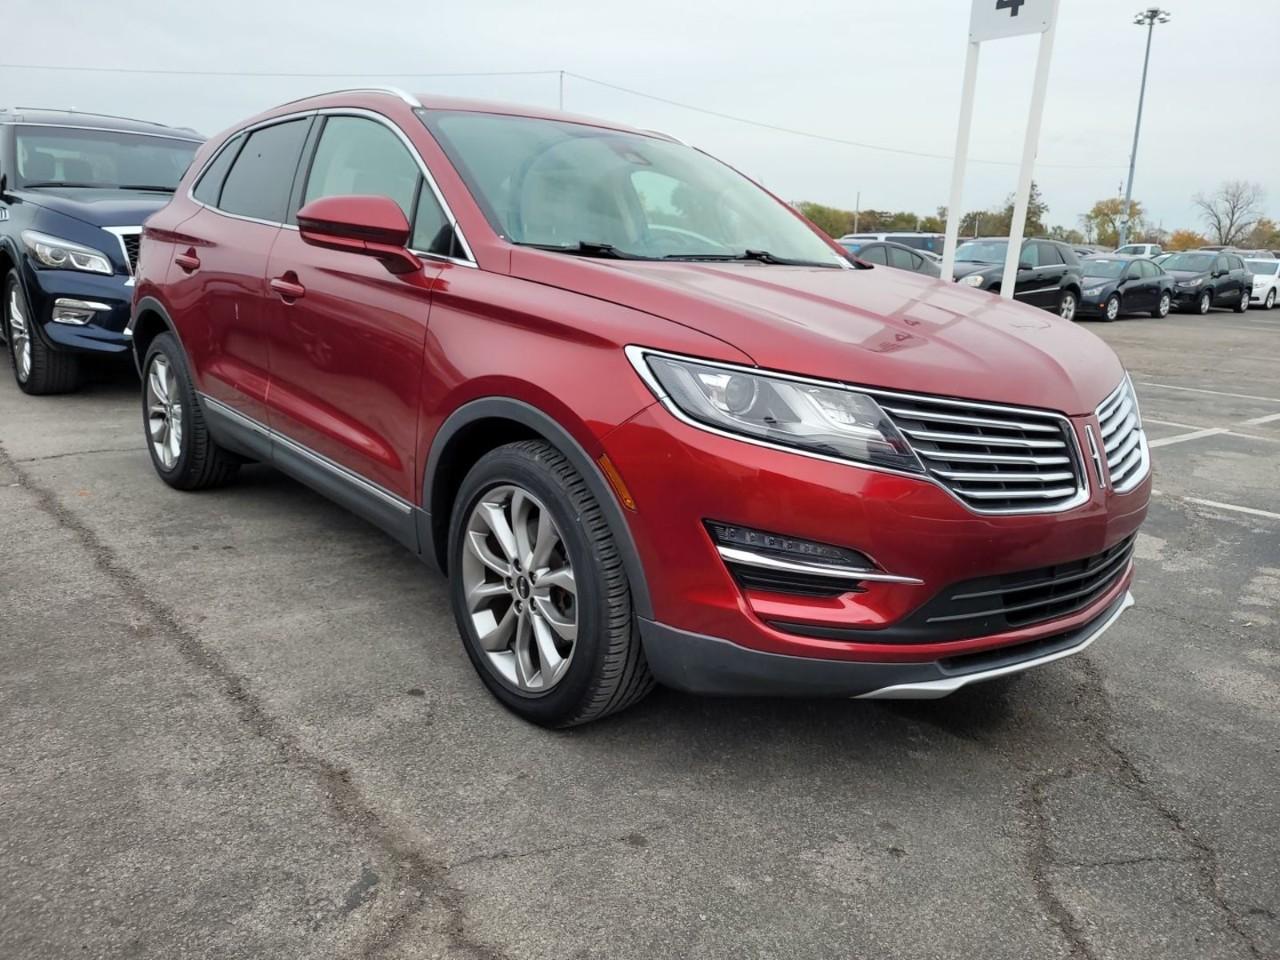 Lincoln MKC Vehicle Full-screen Gallery Image 1